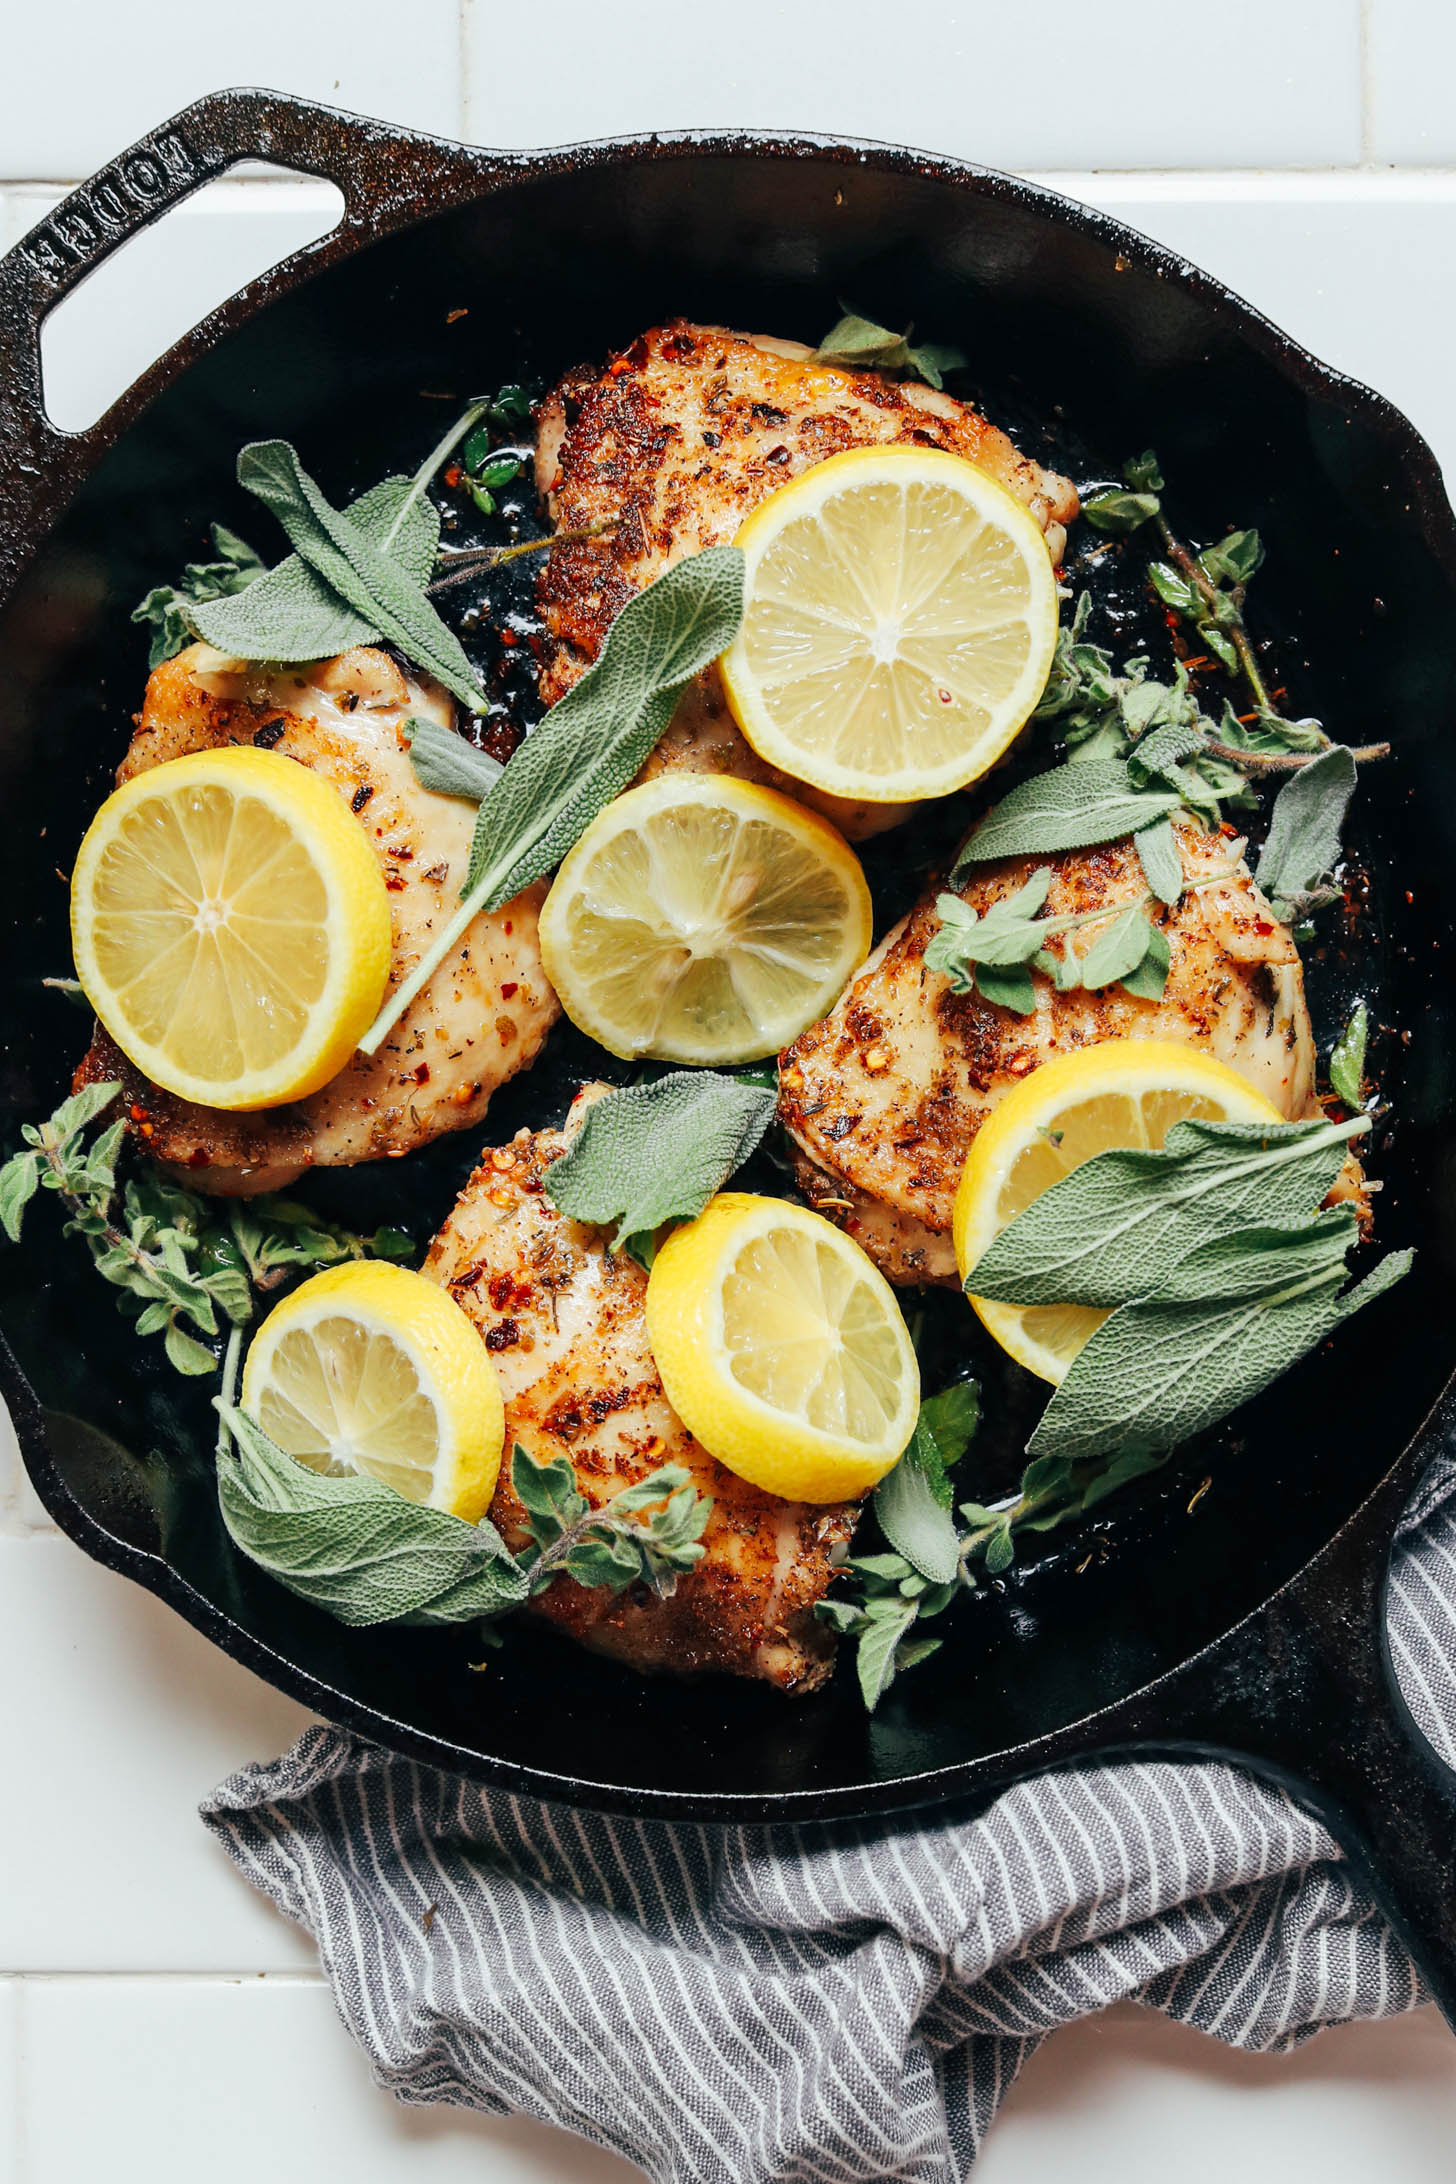 Skillet of seared chicken thighs topped with lemon slices and herbs